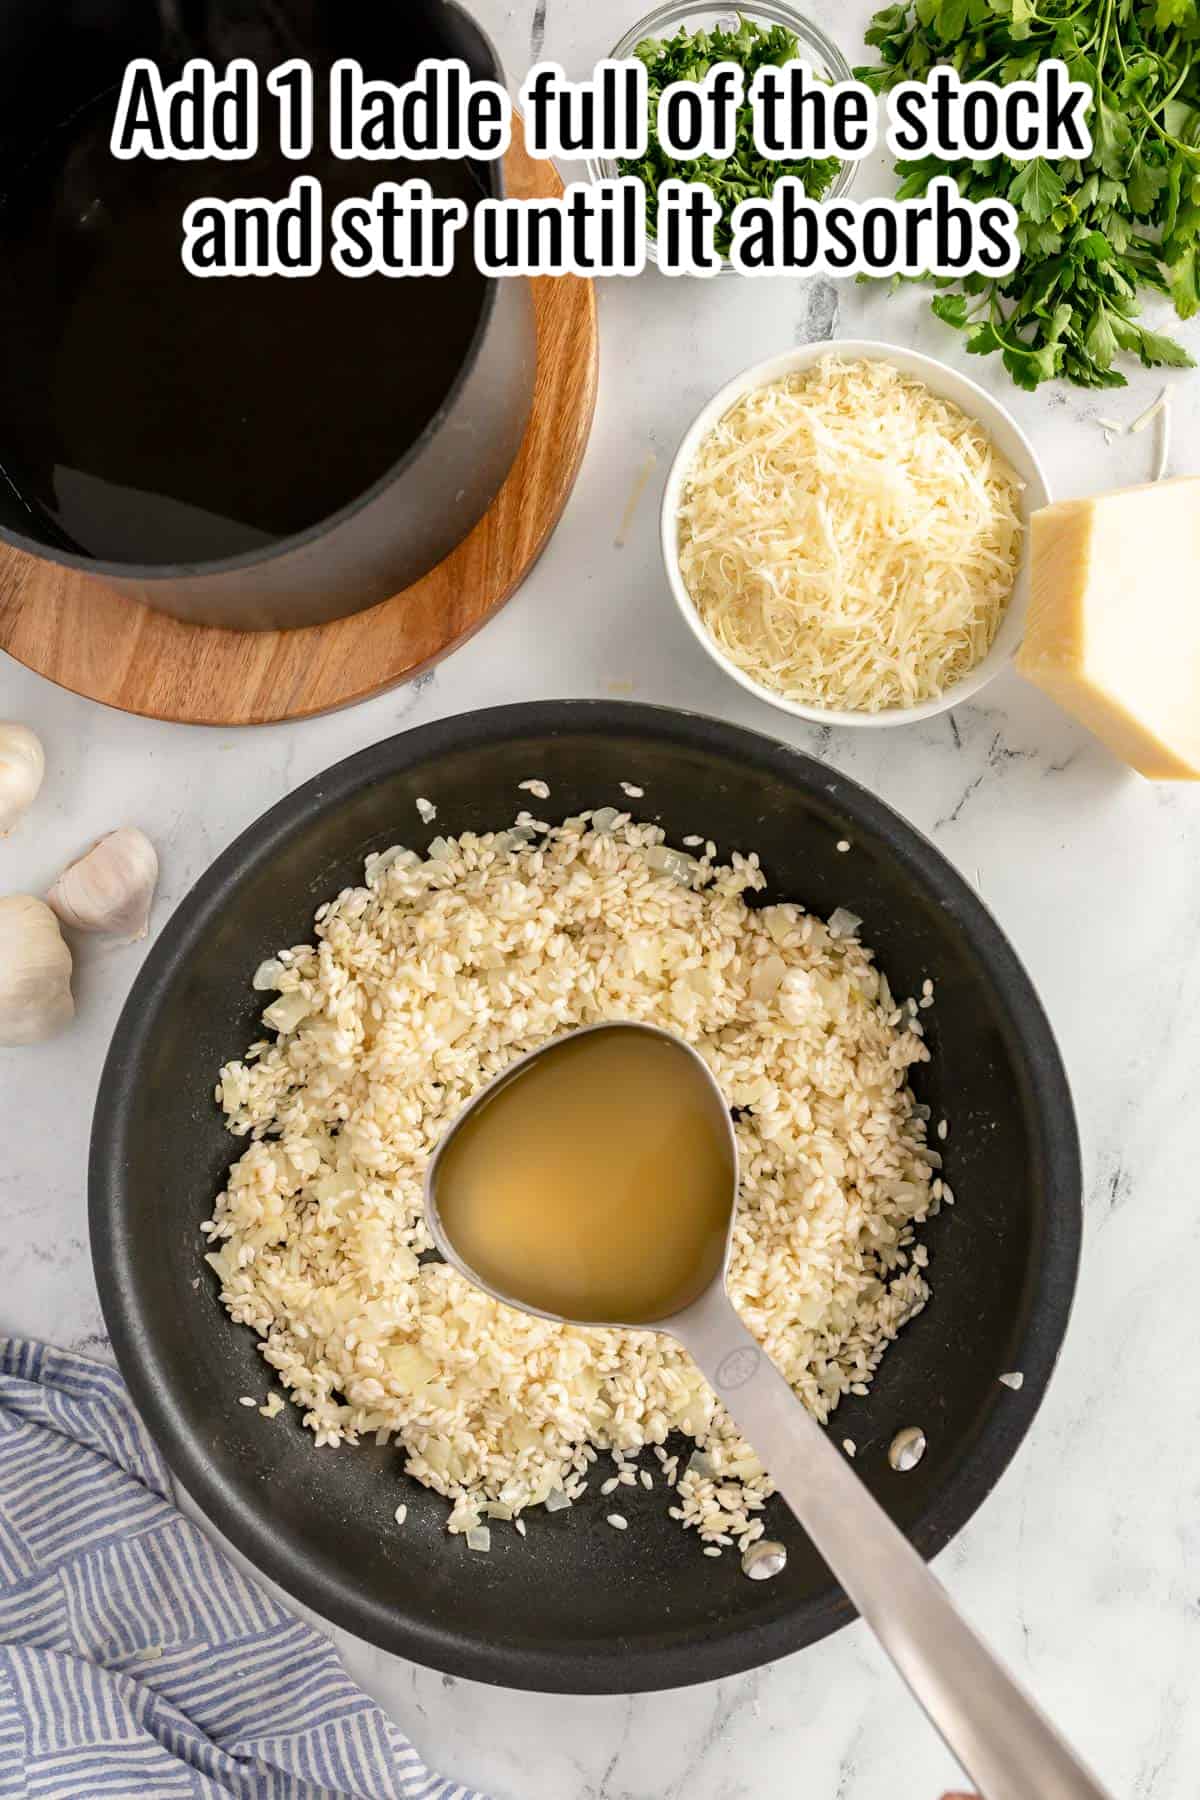 a black skillet of risotto with a ladle full of stock.